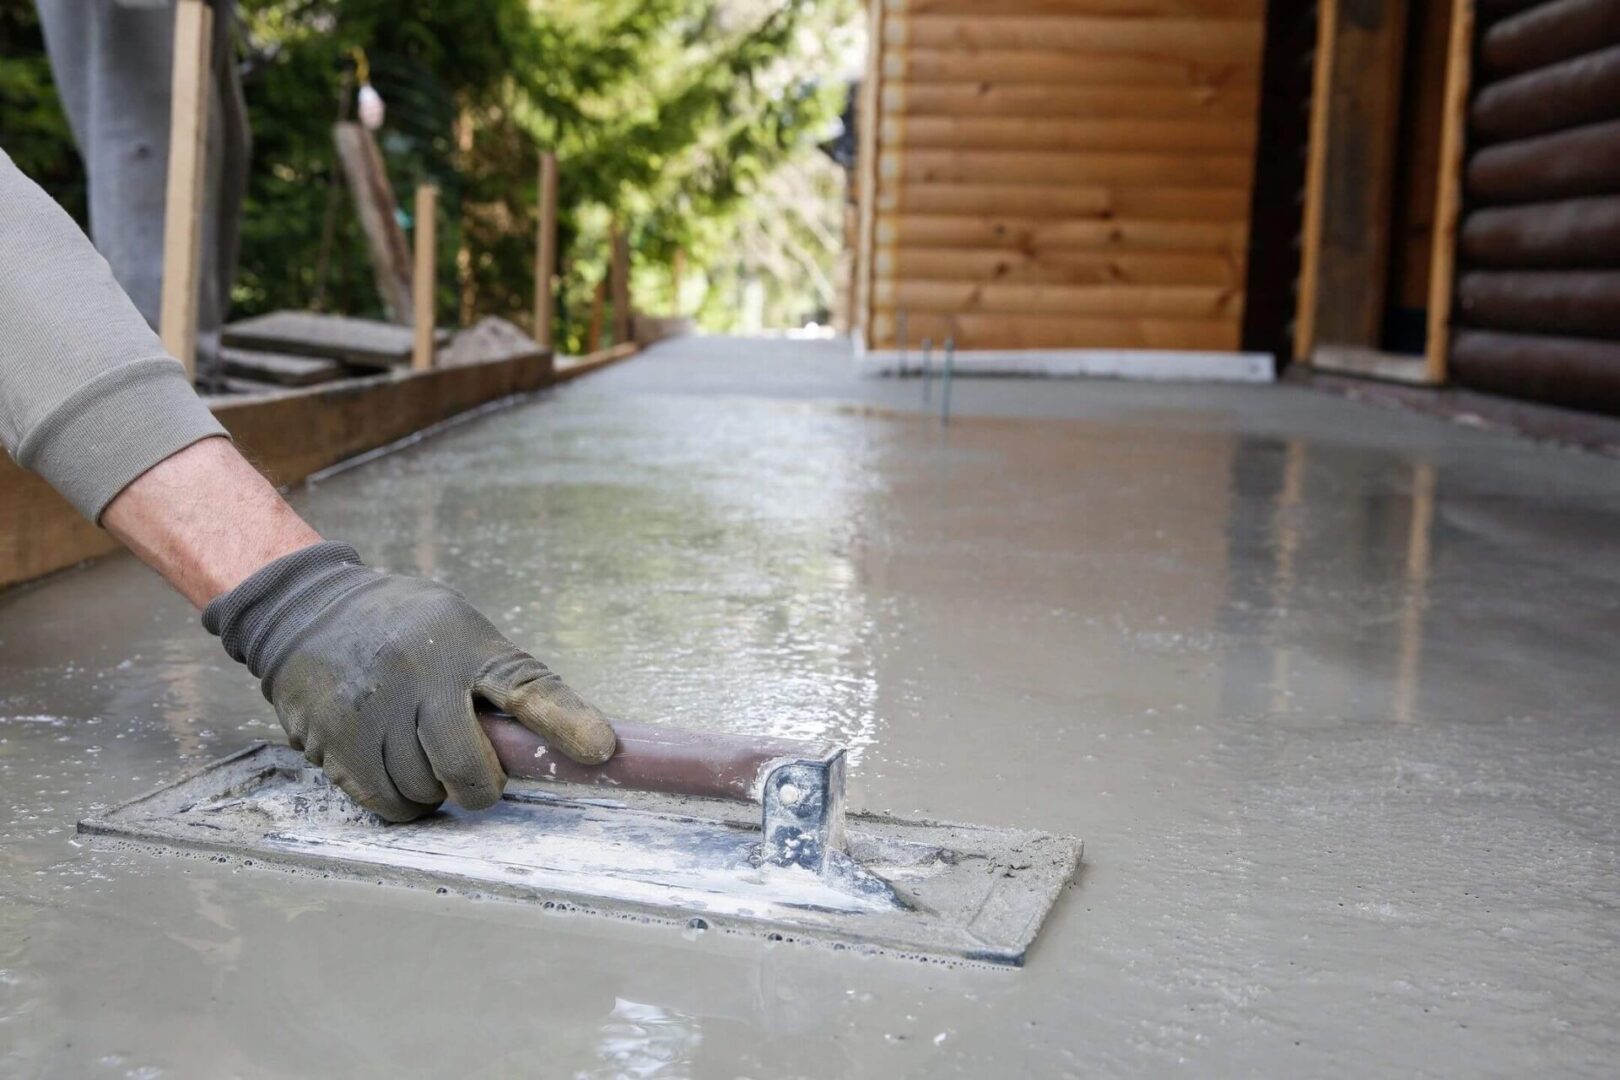 A person is working on the floor of a house.